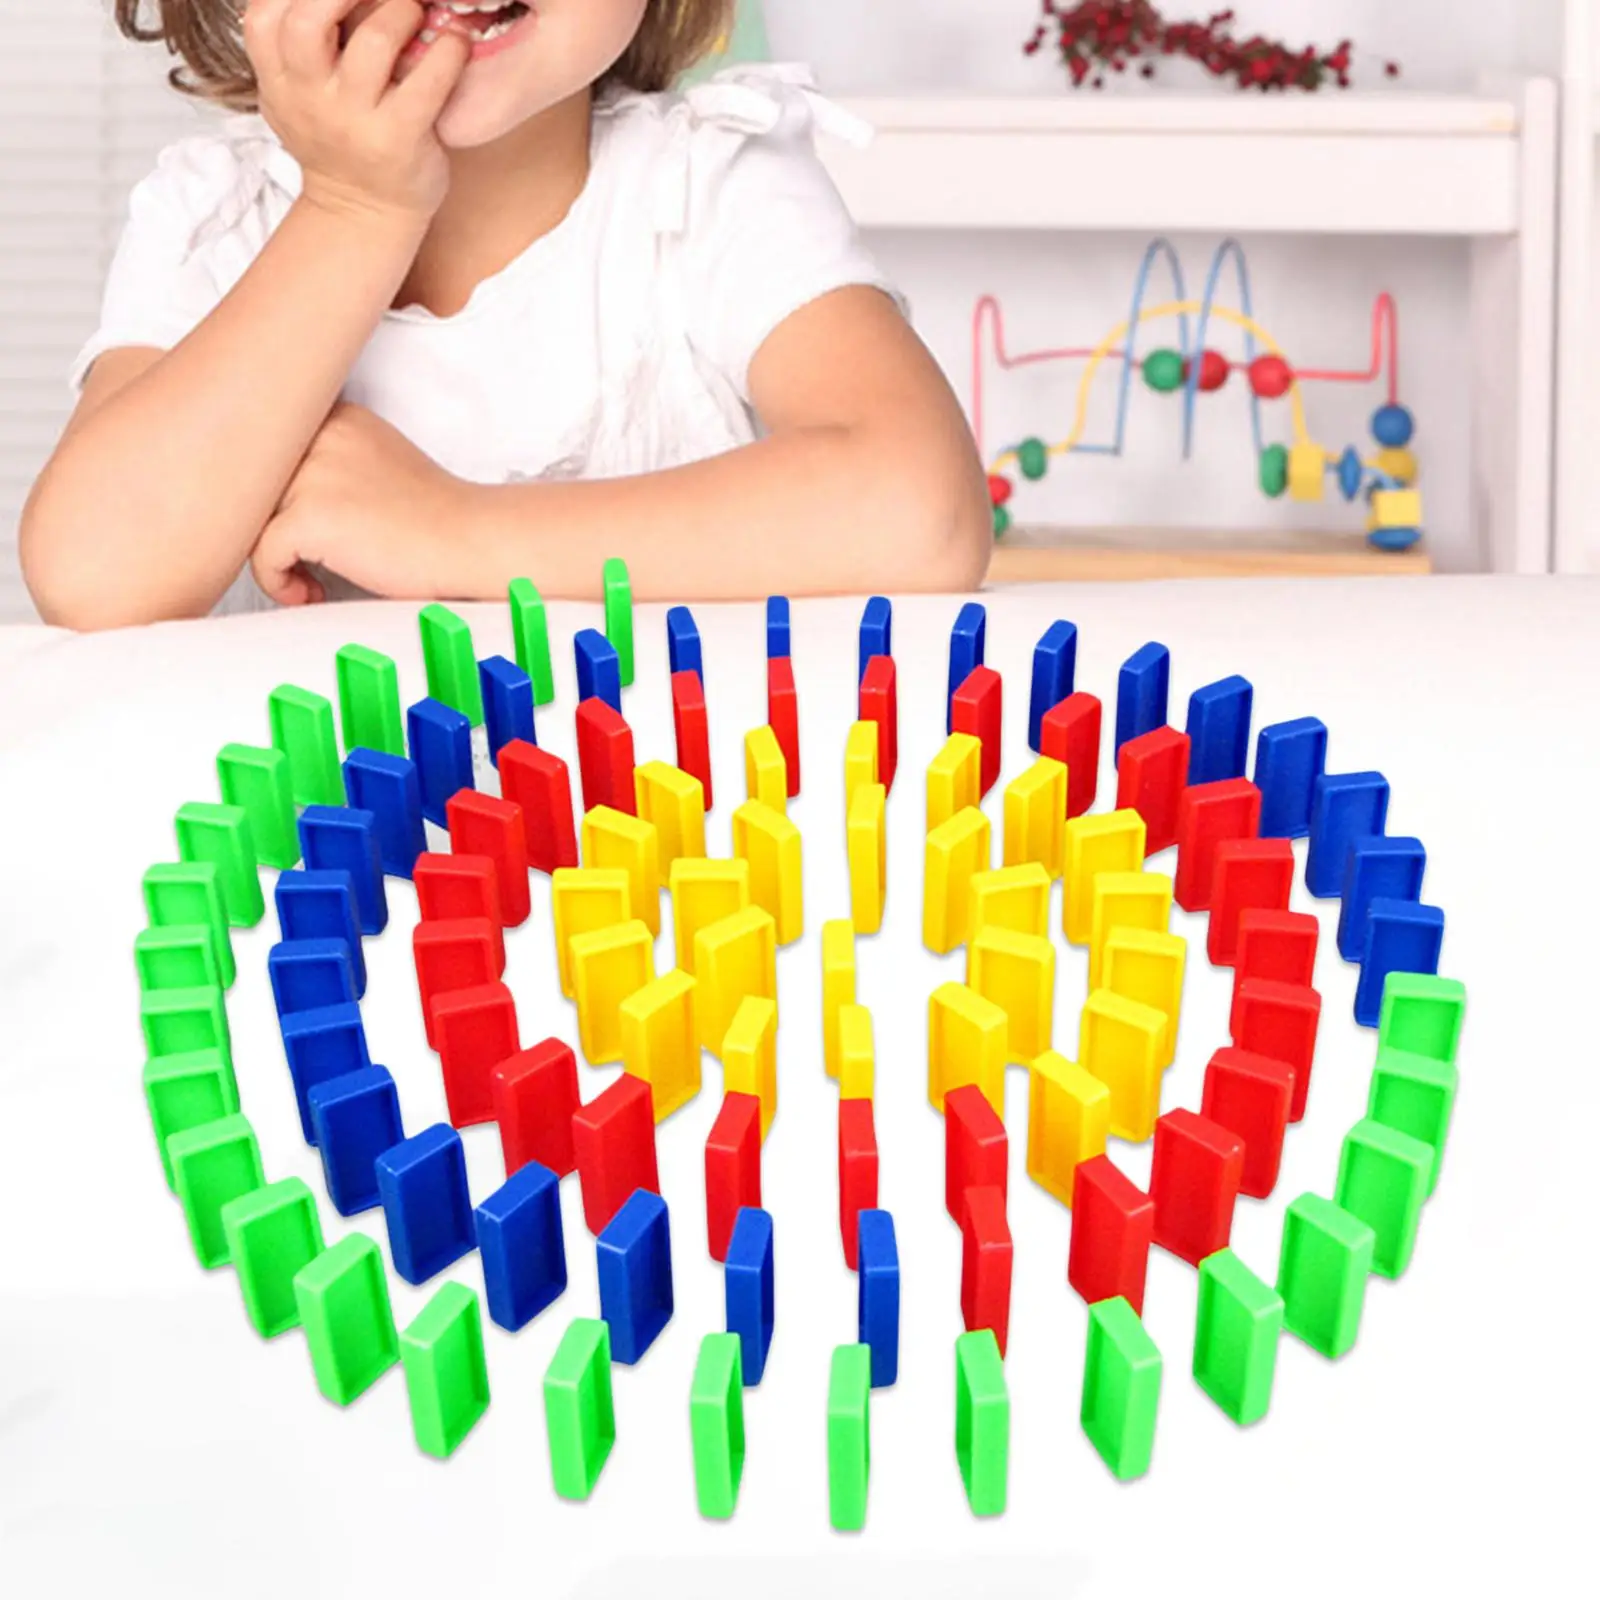 100x Dominoes Train Blocks Set Educational Play Toy for Creative Gifts